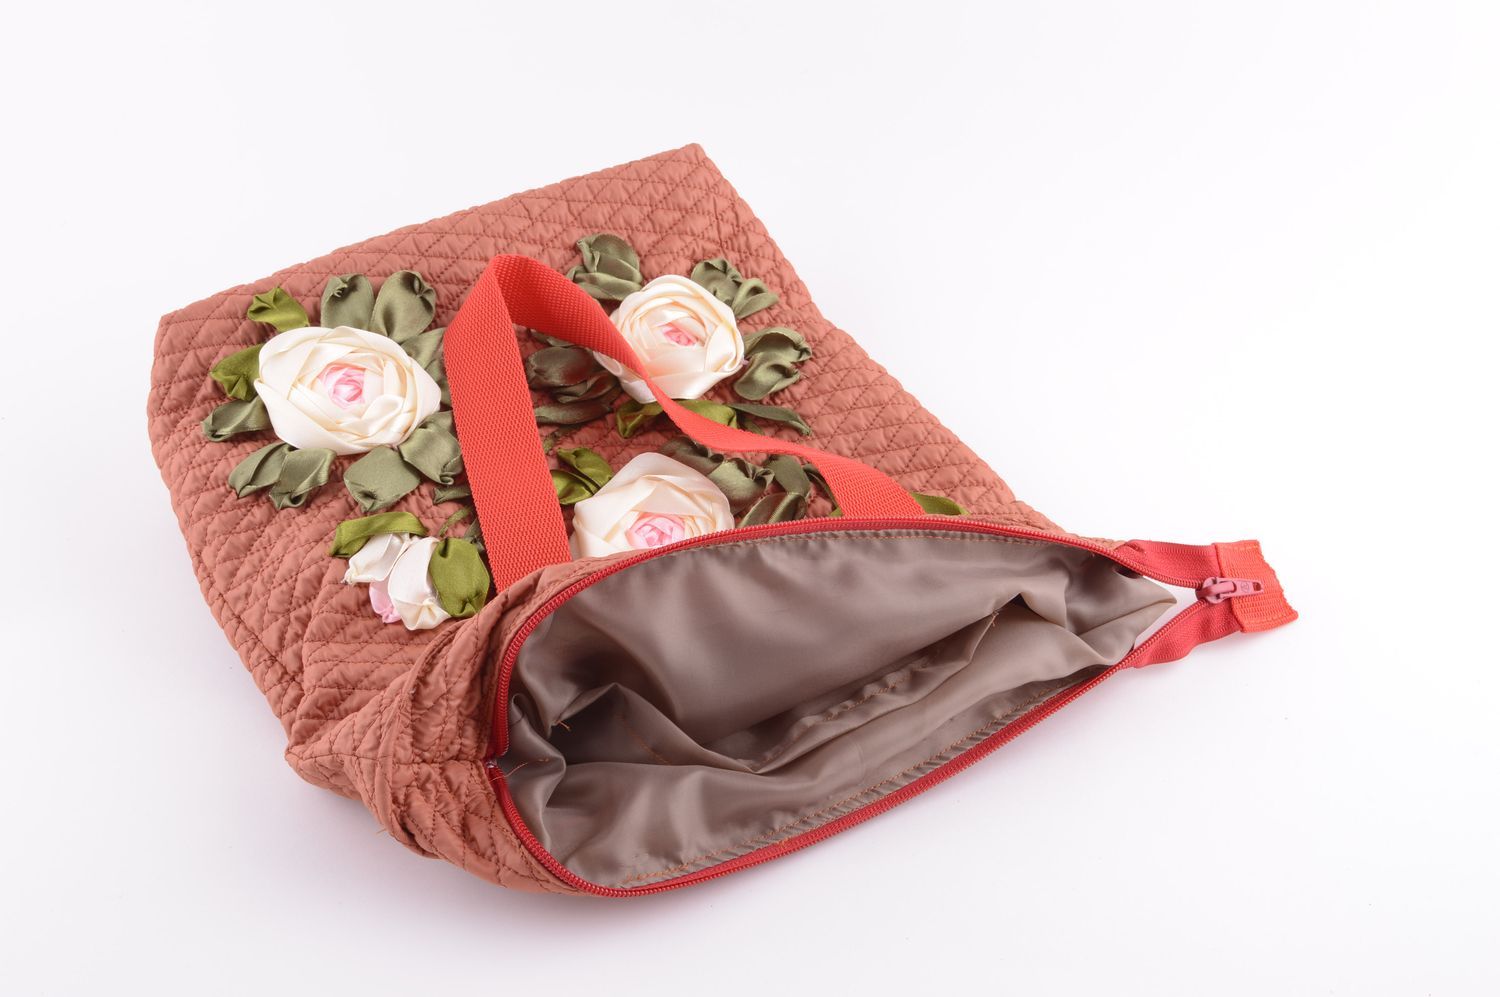 Shoulder bag unusual handmade textile ladys bag with embroidered flowers photo 4